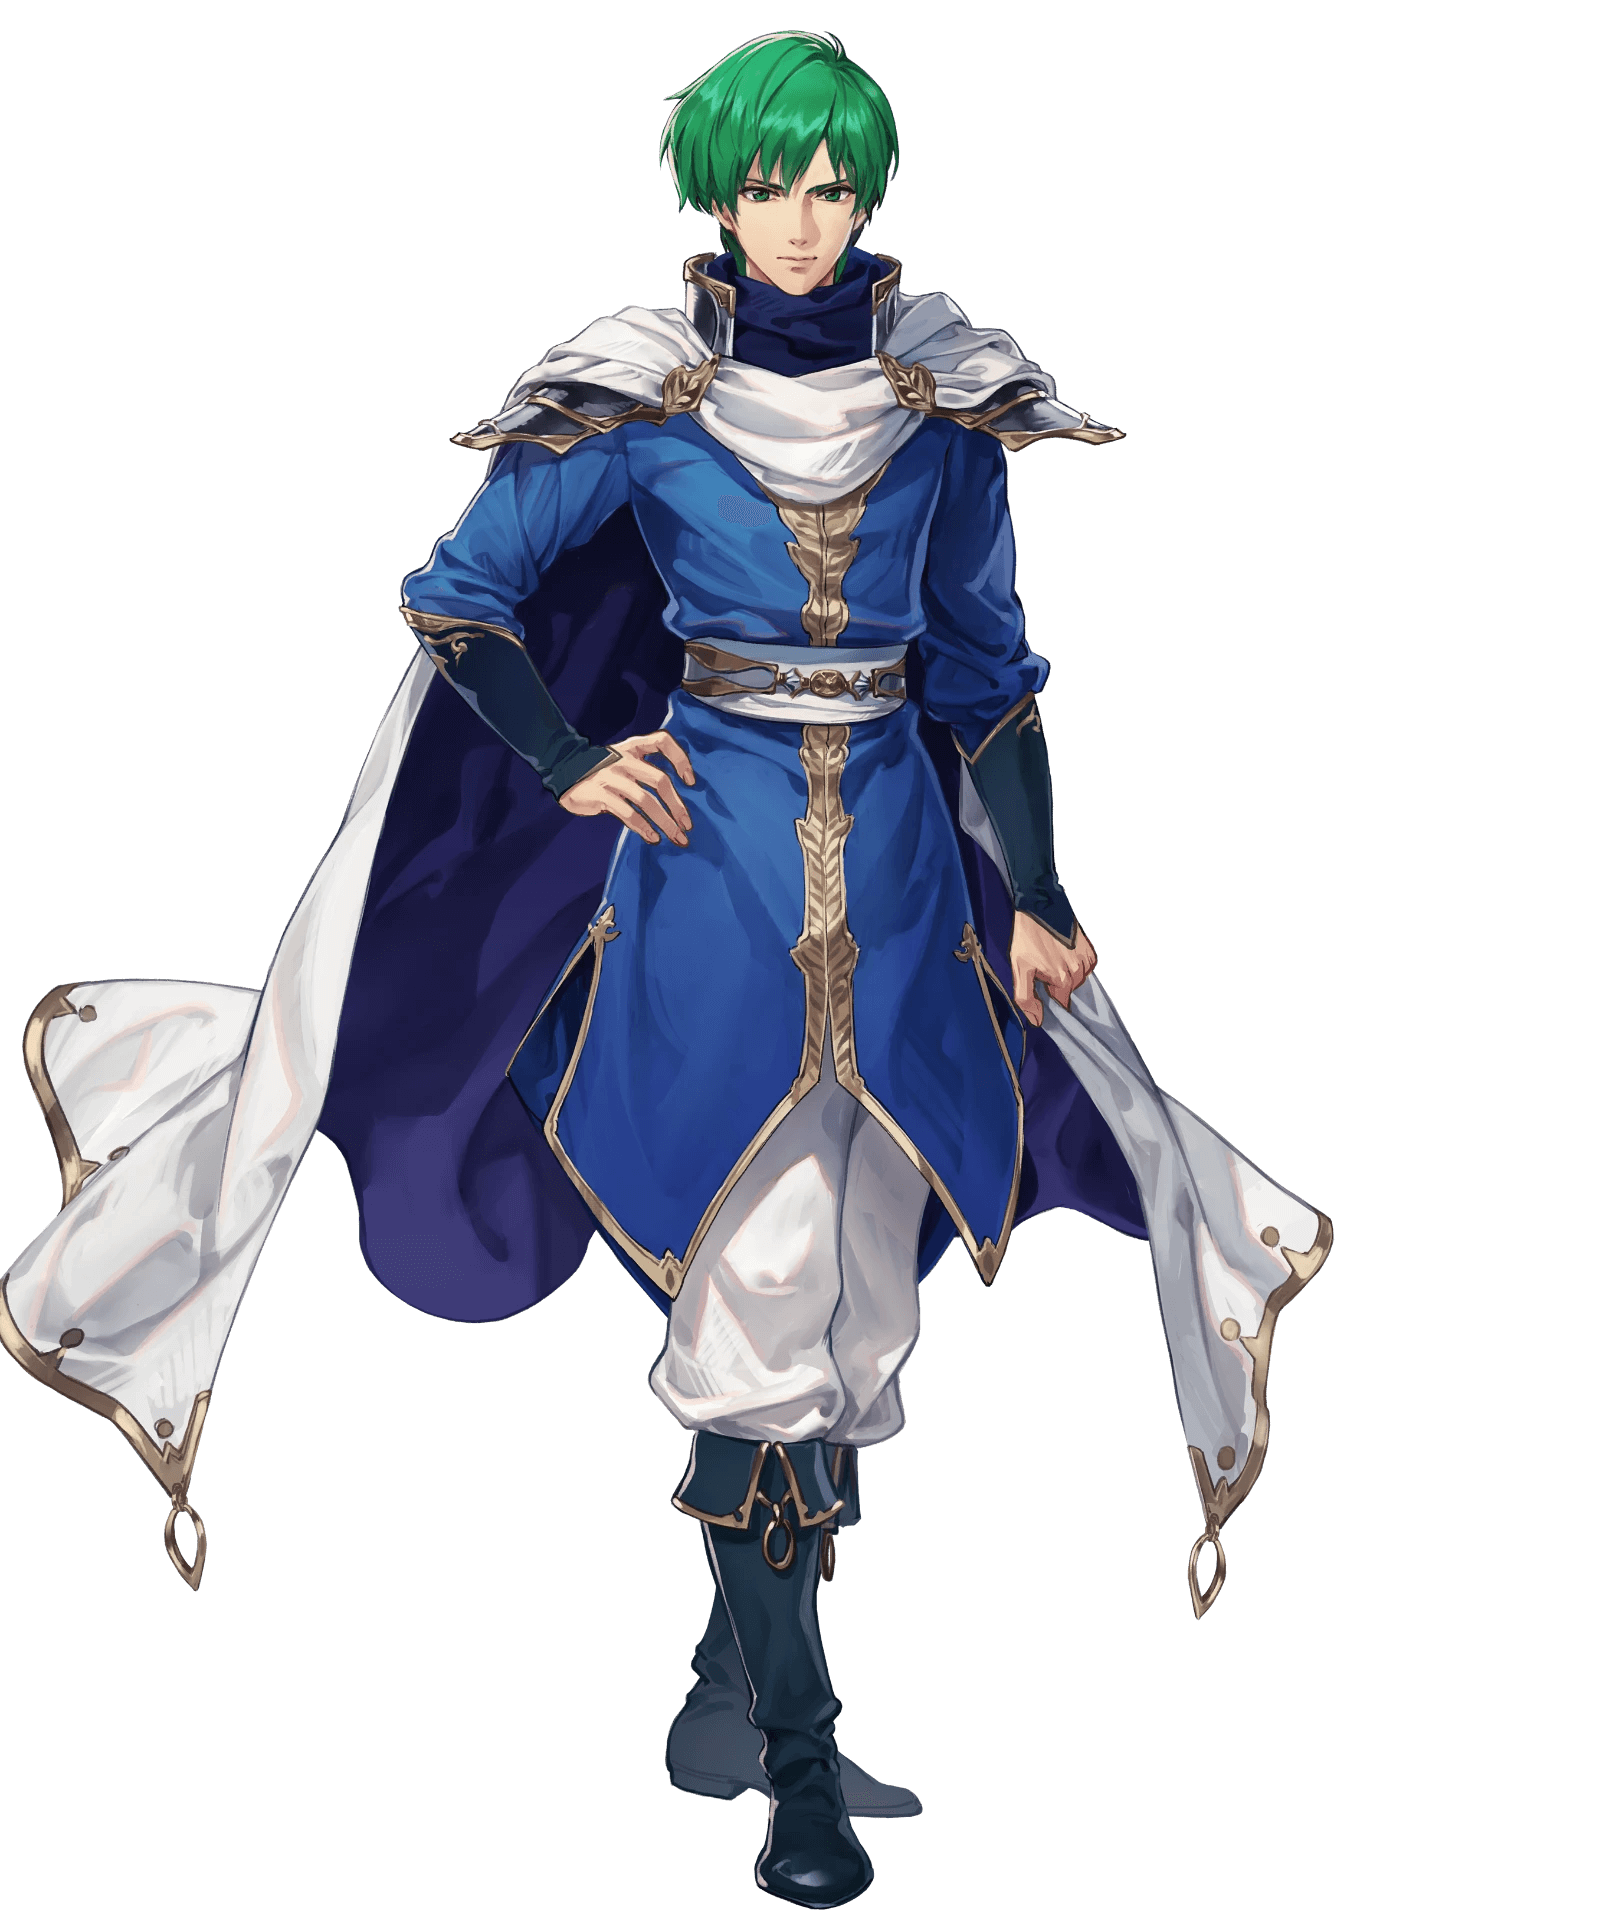 Ced, Hero on the Wind - Fire Emblem: Genealogy of the Holy War / Thracia 776 Minecraft Skin